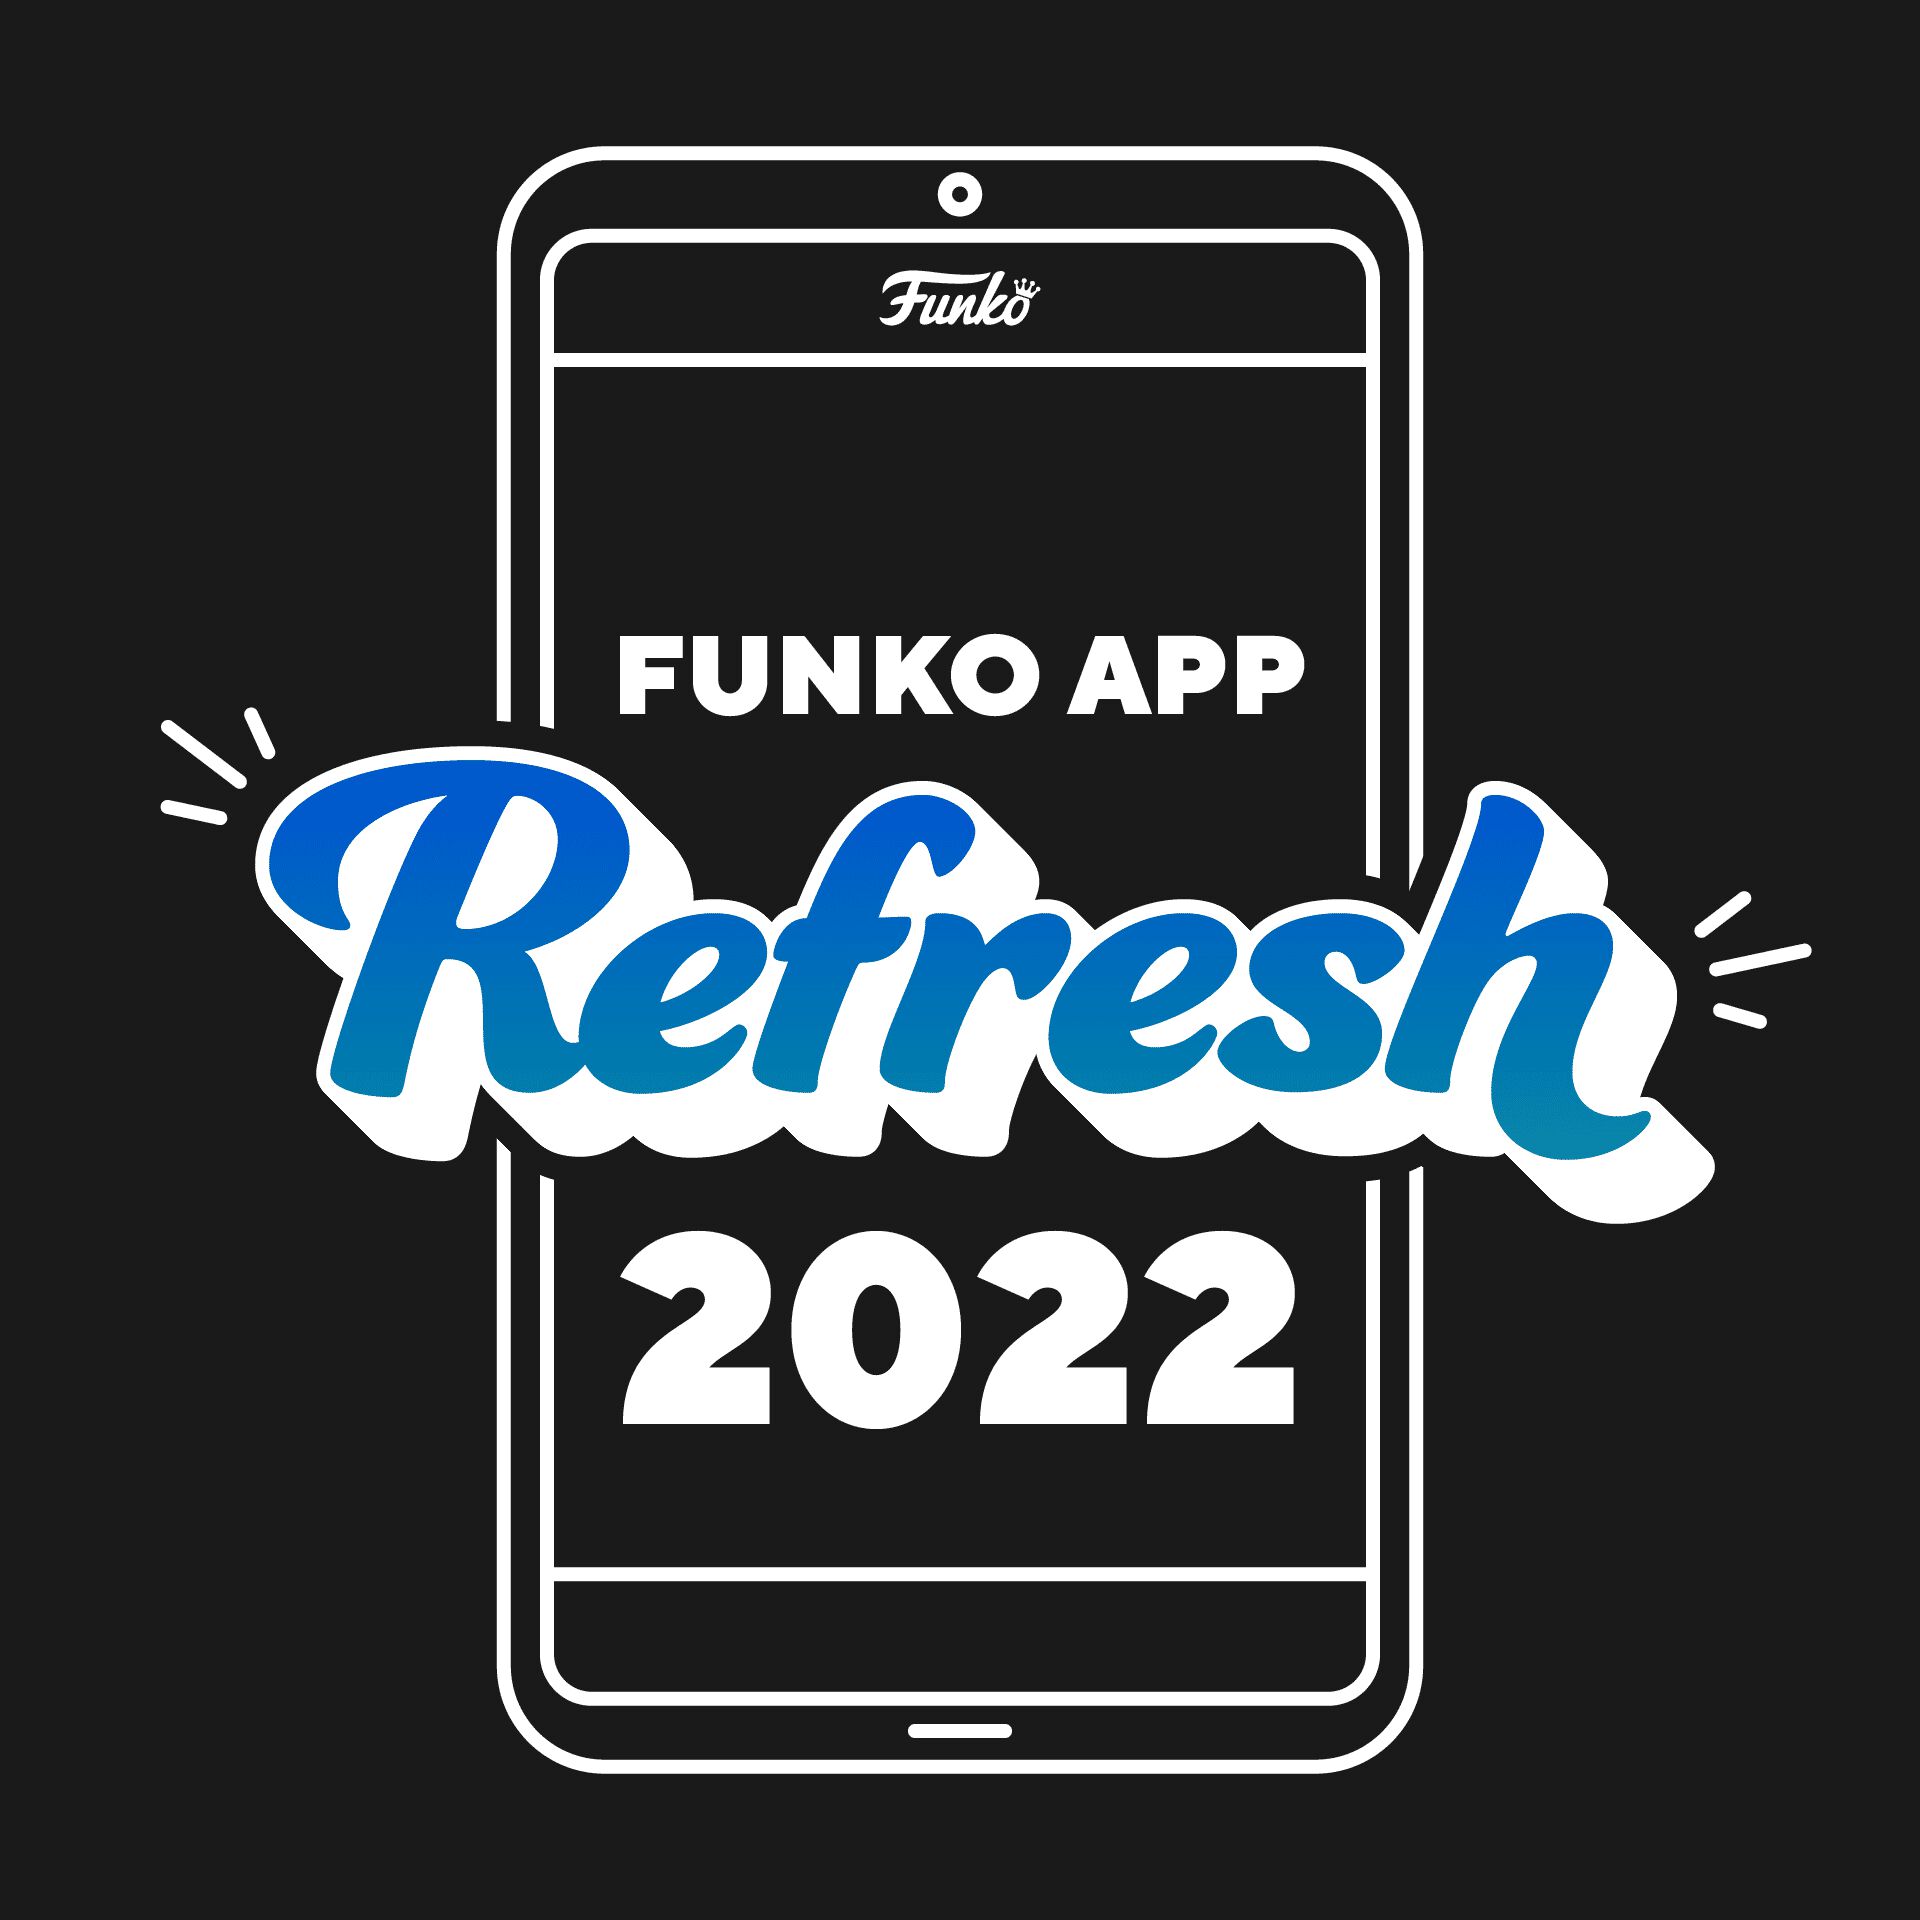 What to Expect from the 2022 Funko App Refresh